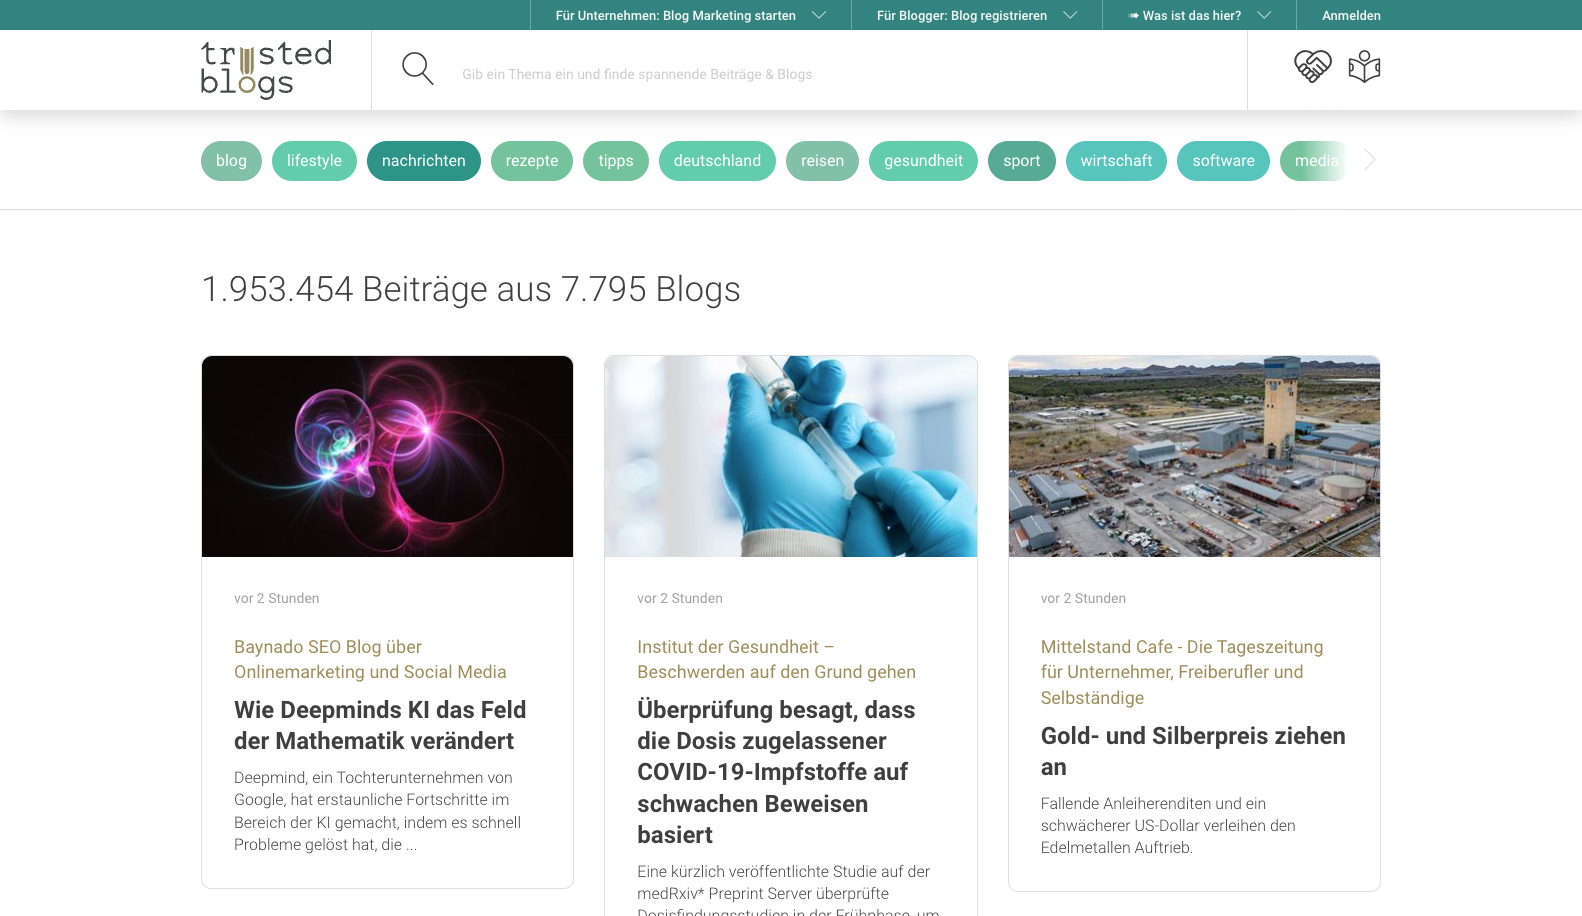 Blog-Suchmaschine trusted blogs